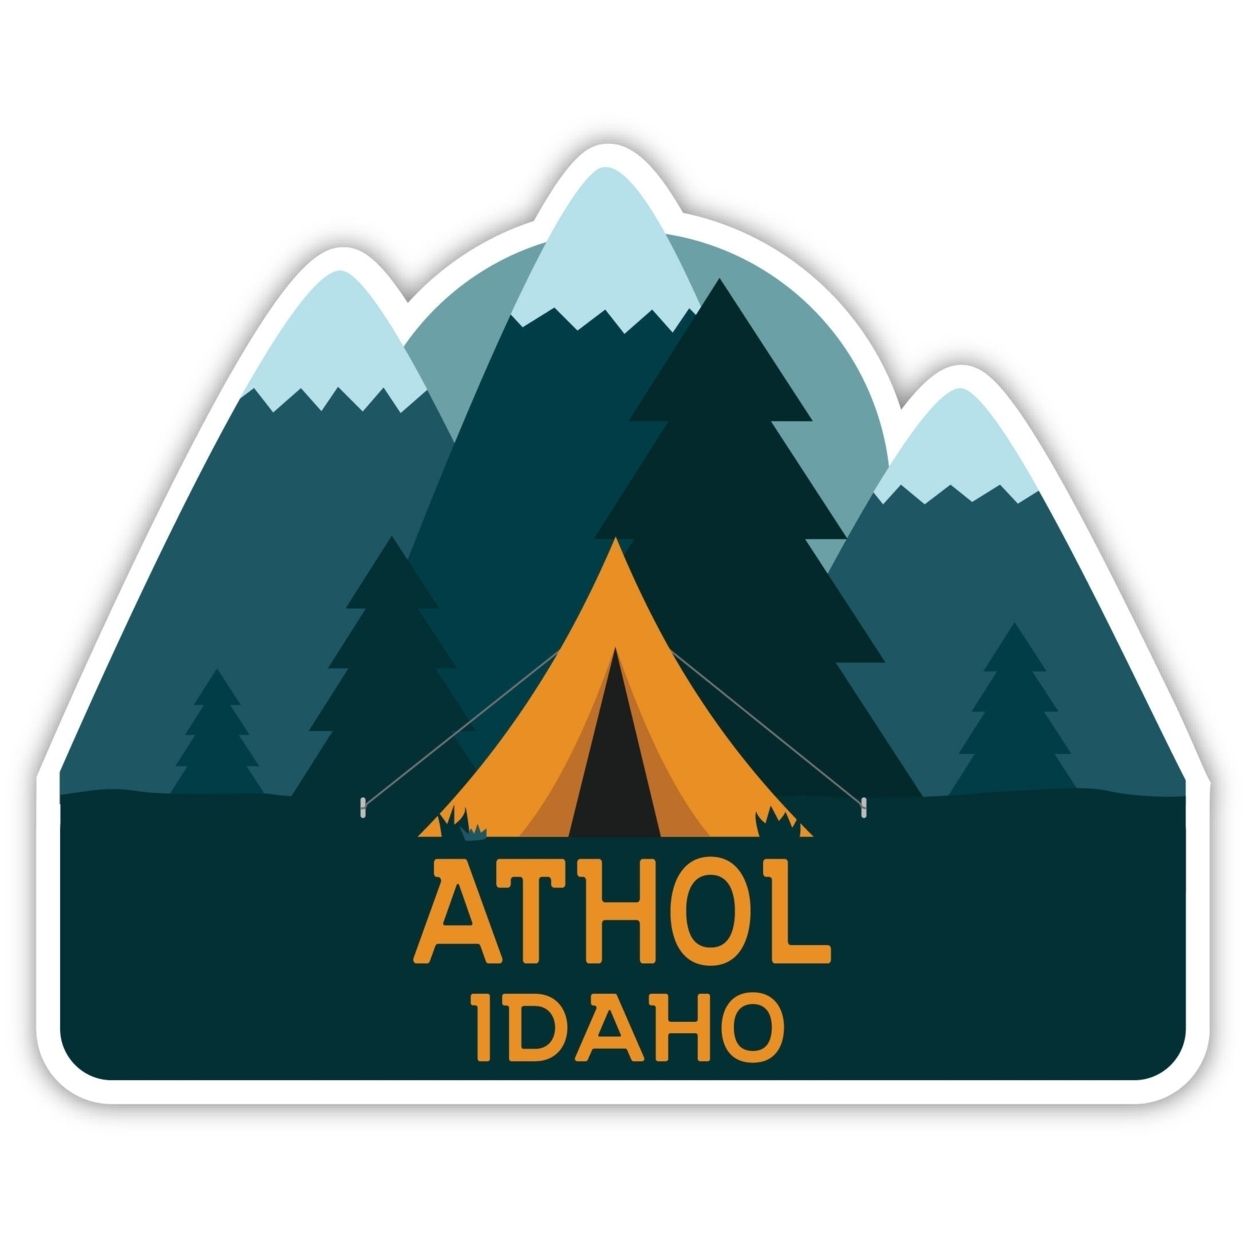 Athol Idaho Souvenir Decorative Stickers (Choose Theme And Size) - 4-Pack, 8-Inch, Tent